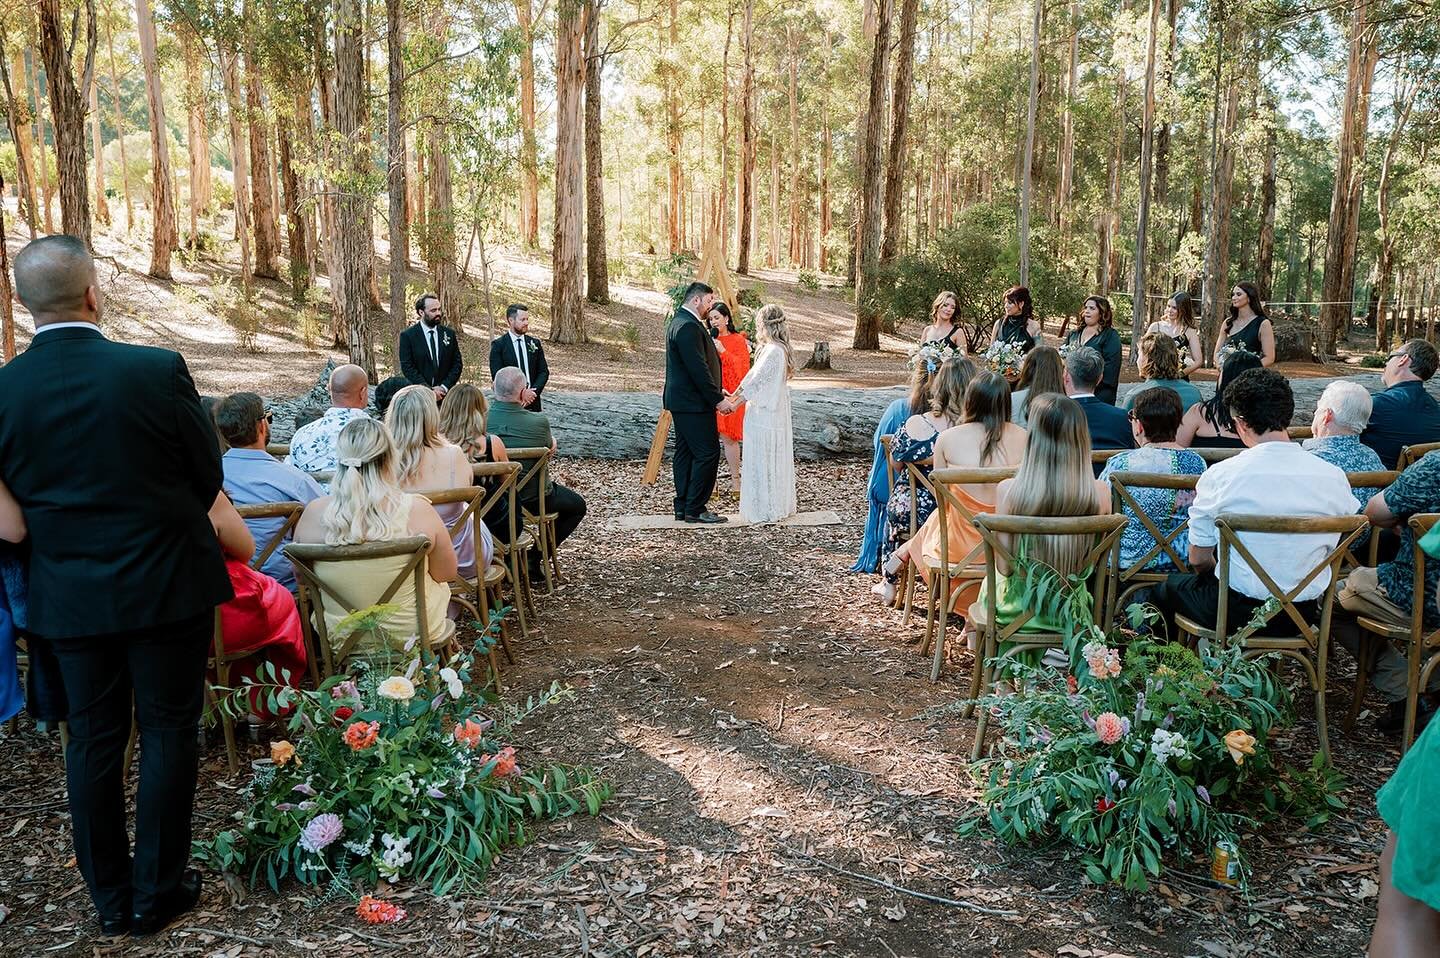 In a stunning forest by the Donnelly River, Illona and Trevor were married 💋🫀

@illonanicole 
@__trevor.james__ 
@petethephotographer.co 
@donnellyrivervillage 
@farmhouseflowerswa 
@katrina_green_hairartistry 
@the_weddingdj 
.
.
.
#loveineverydet